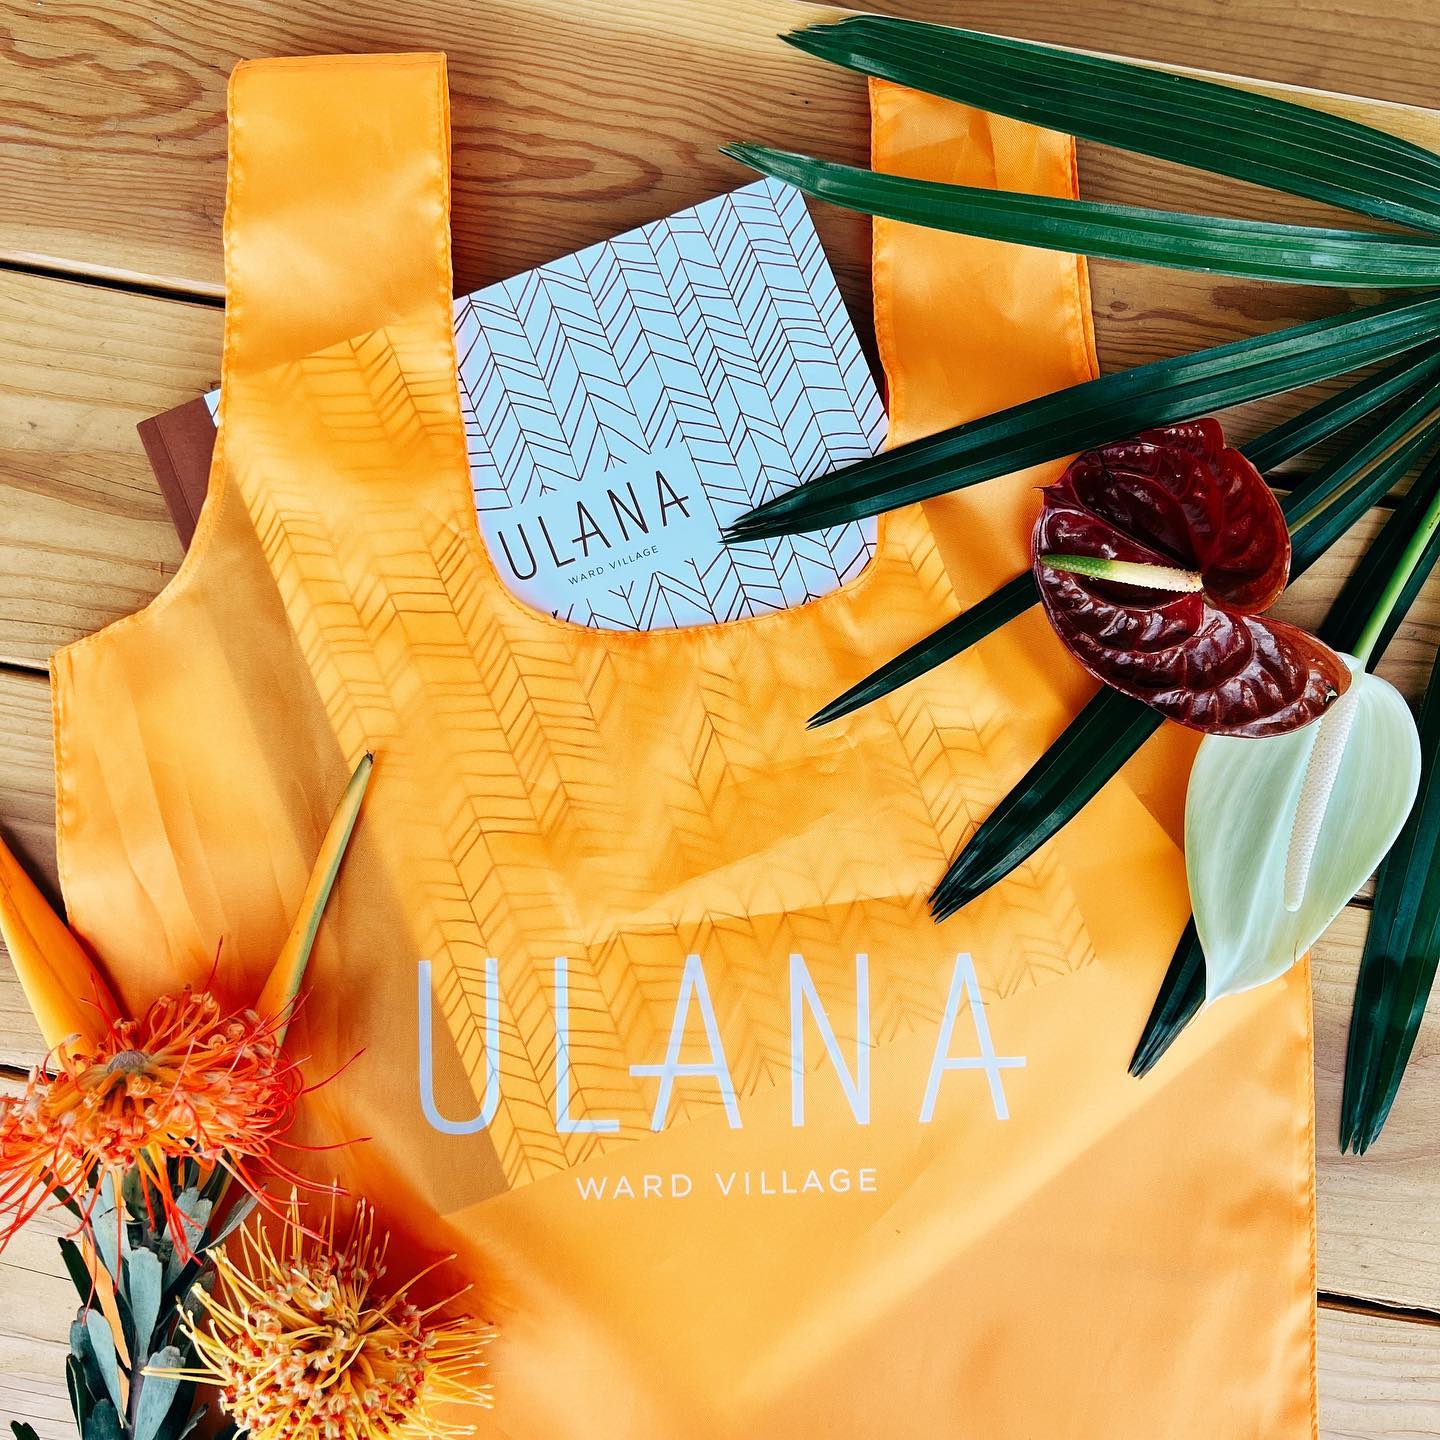 If you’re shopping at the Farmers Market on Saturday, be sure to visit the Ulana team on the mauka side of the market and pick up an application packet! Once completed, Ulana will be located just a few blocks from the Farmers Market so you can stroll the stands every weekend and return home to barbeque cabanas, reservable indoor-outdoor rooms and two surrounding parks. 

This reserved housing opportunity is available to Hawai‘i homebuyers who meet HCDA reserved housing criteria, with residences priced from $271,000 to $717,400.